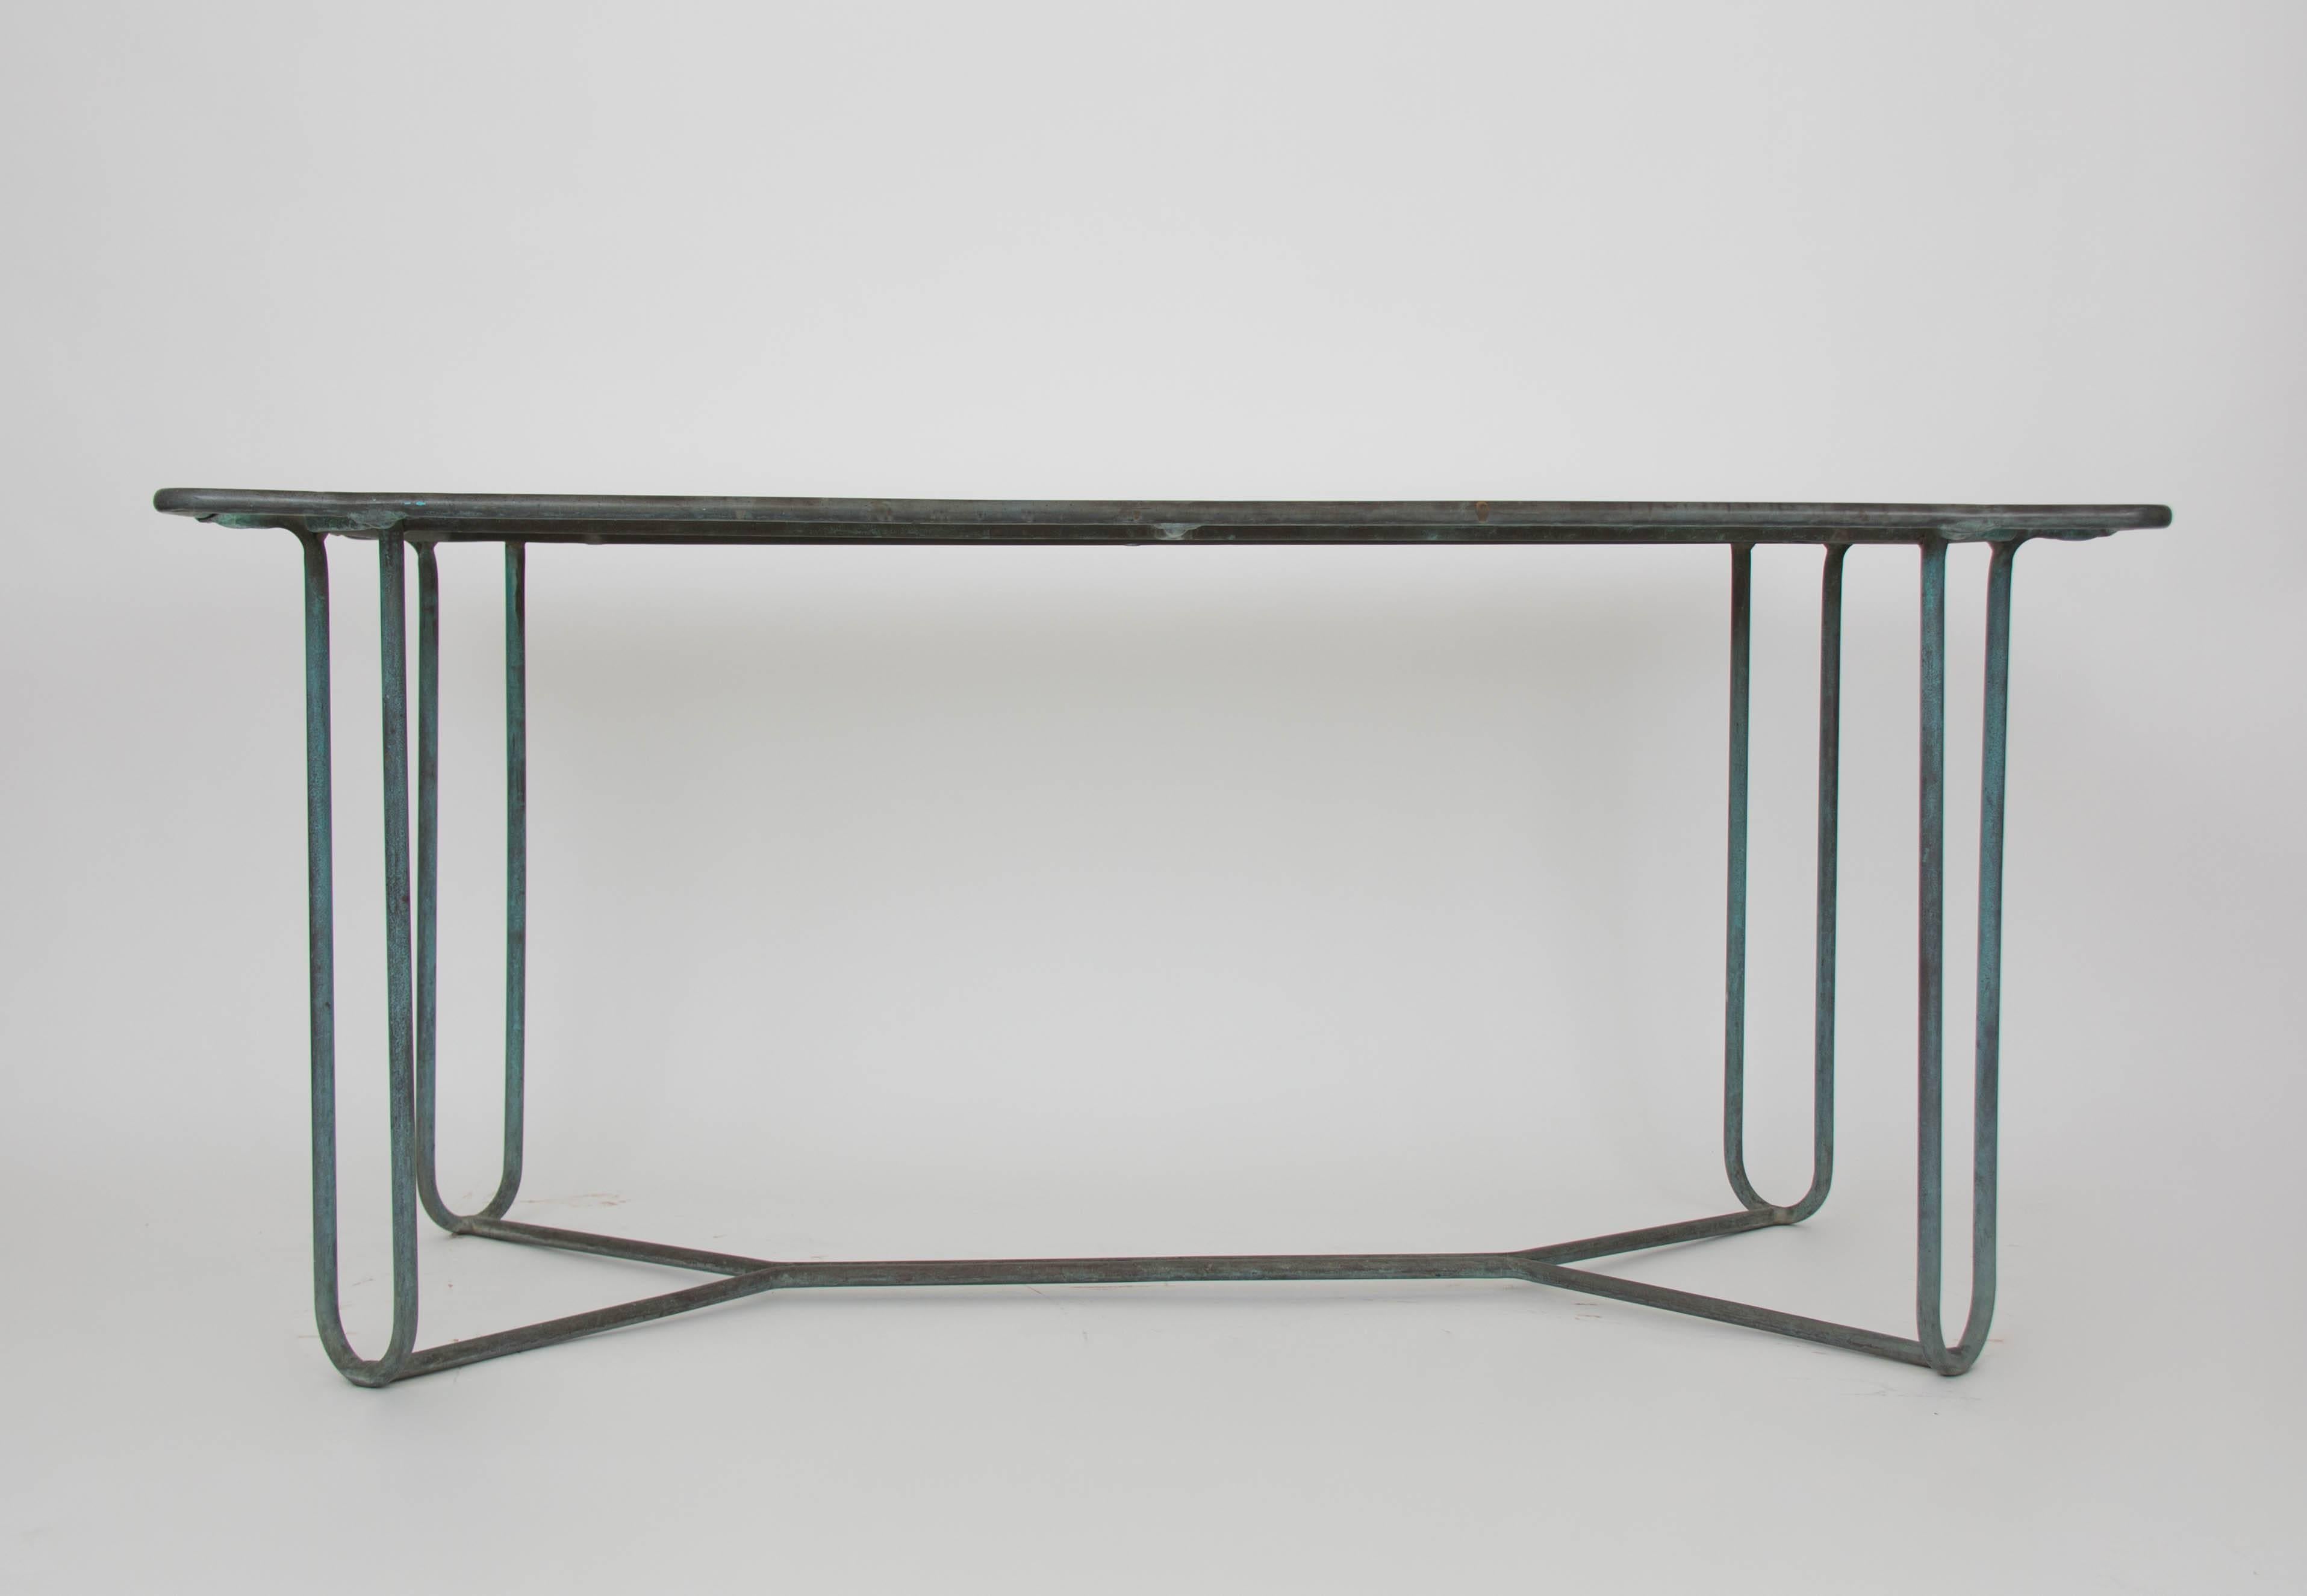 A patio dining table in patinated bronze designed by Walter Lamb and produced by Brown Jordan. The table has a rectangular shape with rounded corners, supported by four hairpin legs in matching bronze. The legs are joined by diagonal stretchers and